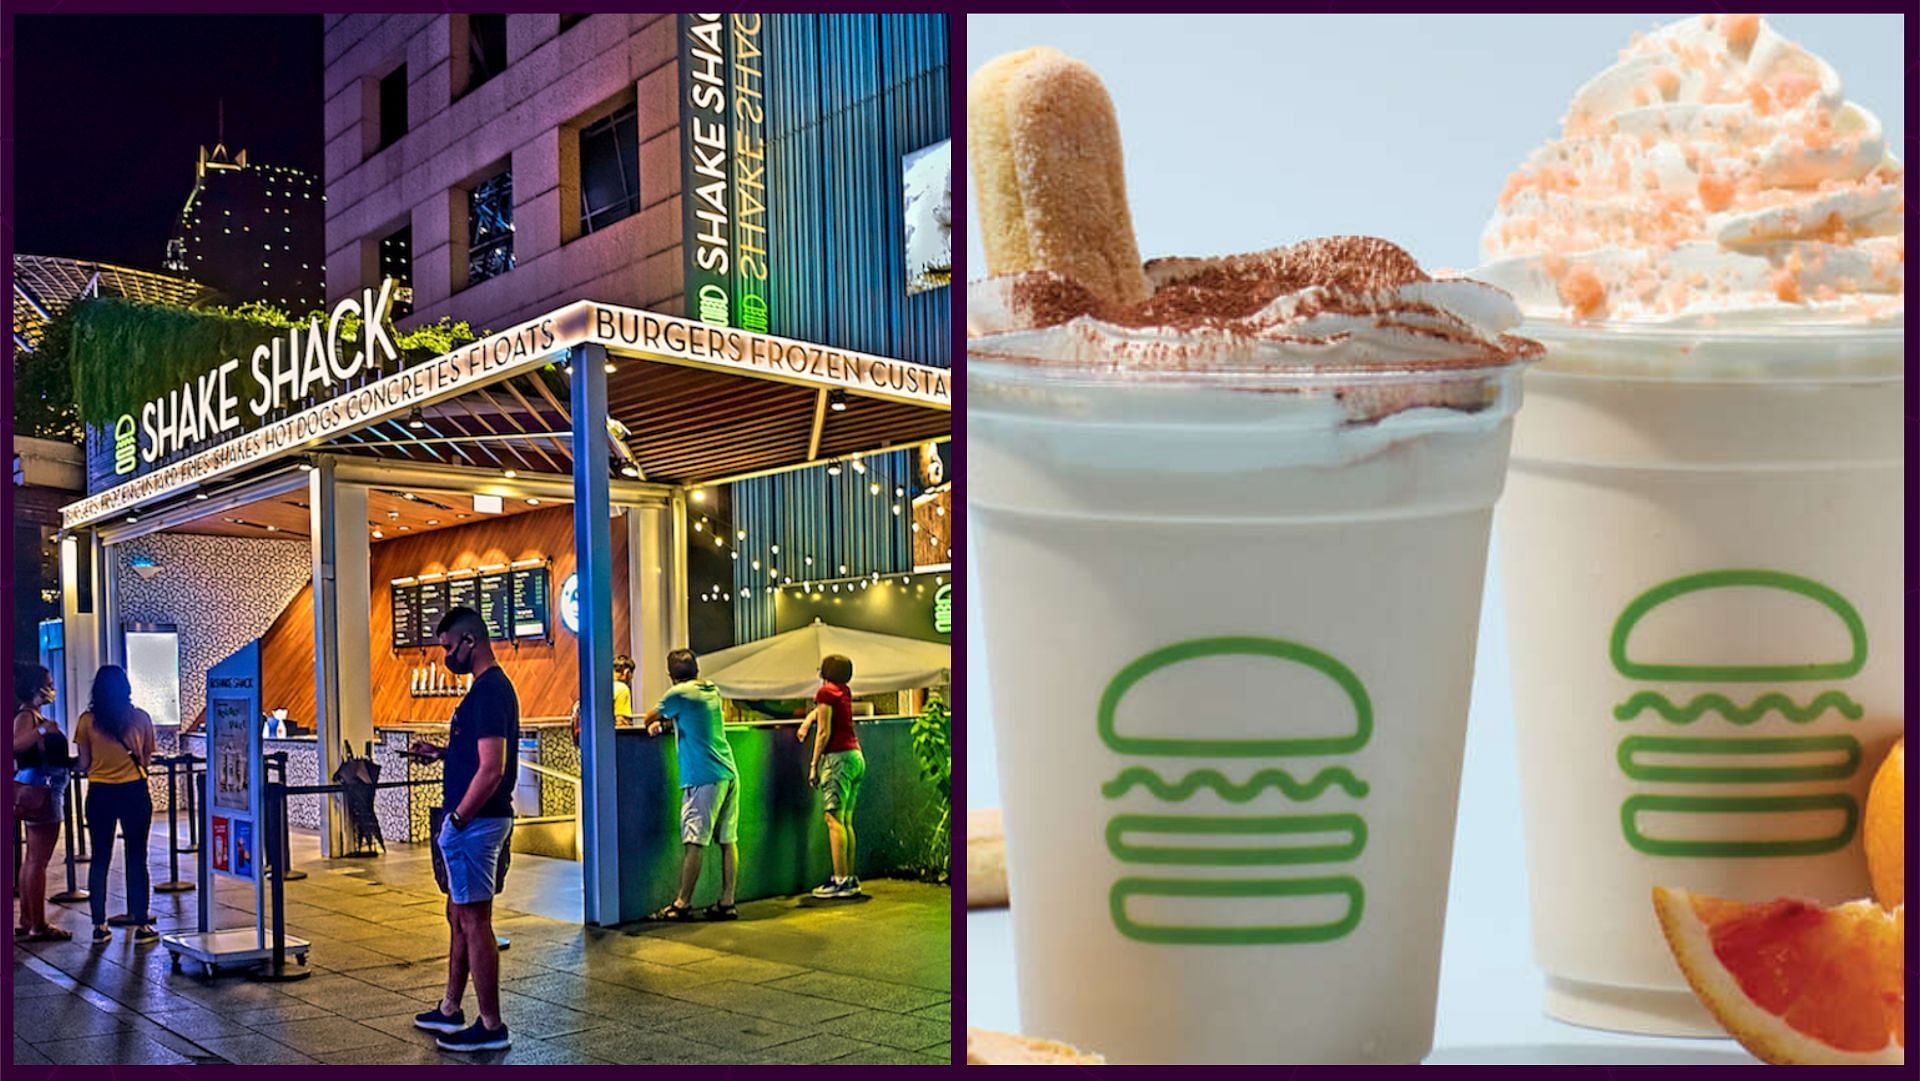 All you need to know about Shake Shack’s new Dreamsicle and the